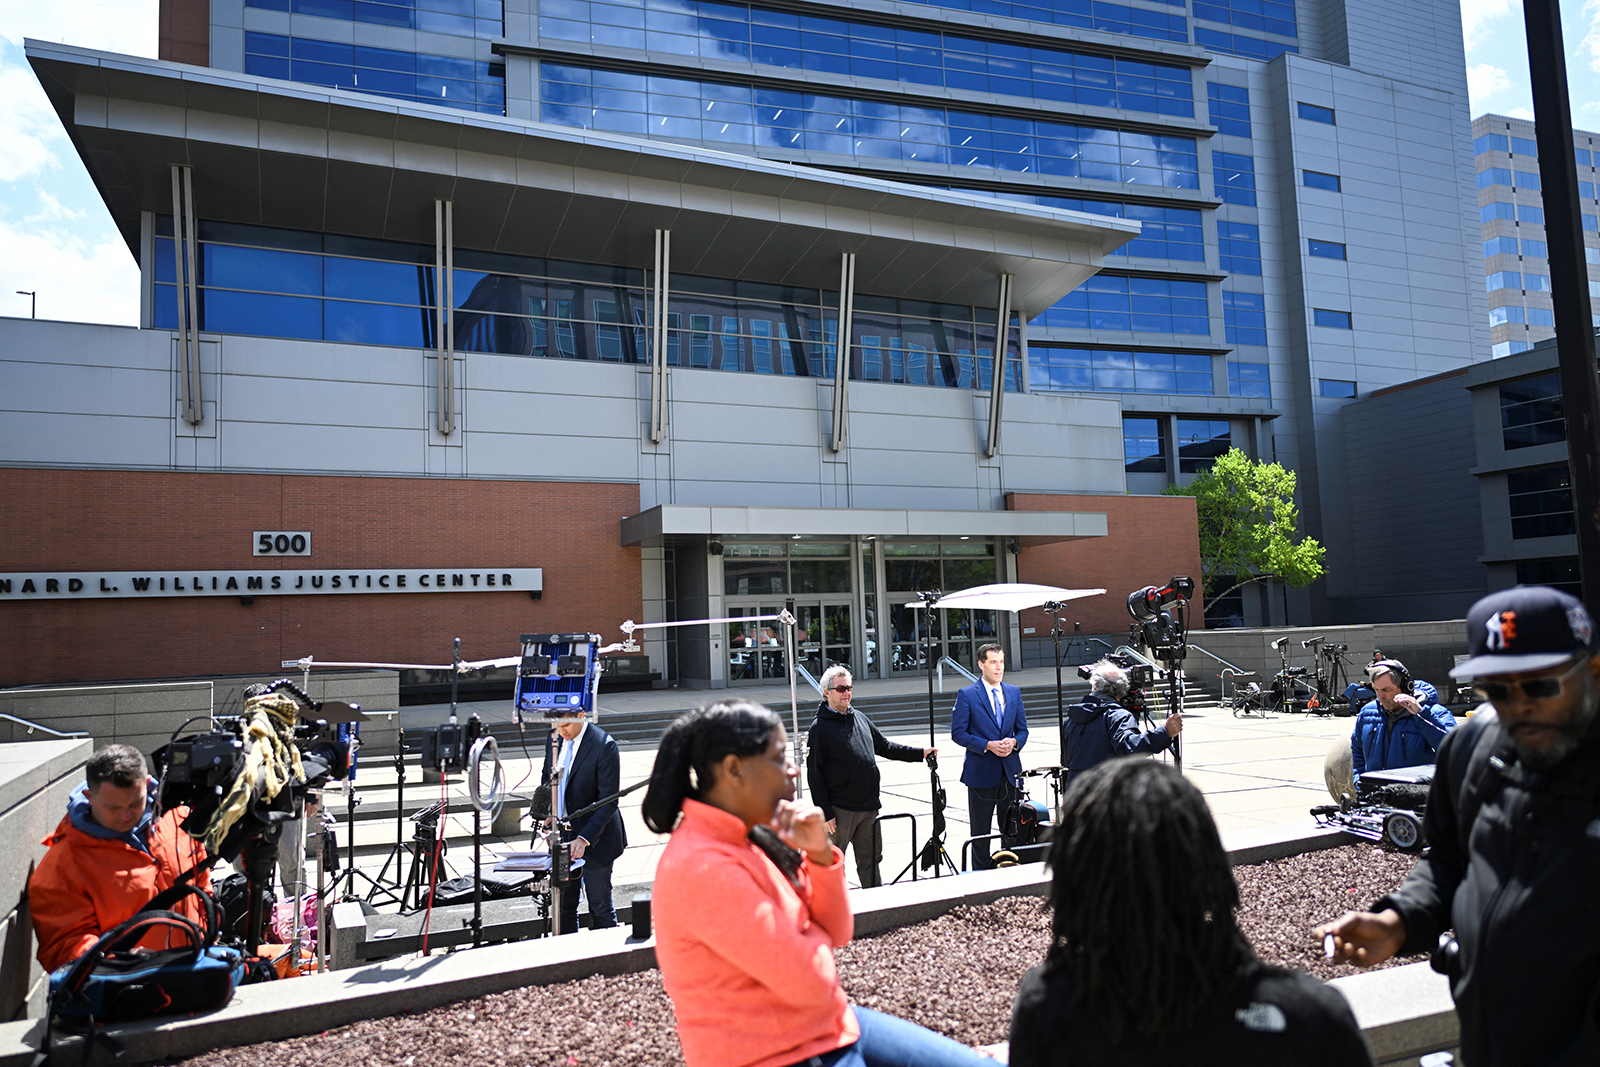 A general view of the Leonard L. Williams Justice Center in Wilmington, Delaware, as media members stand outside, on April 18.